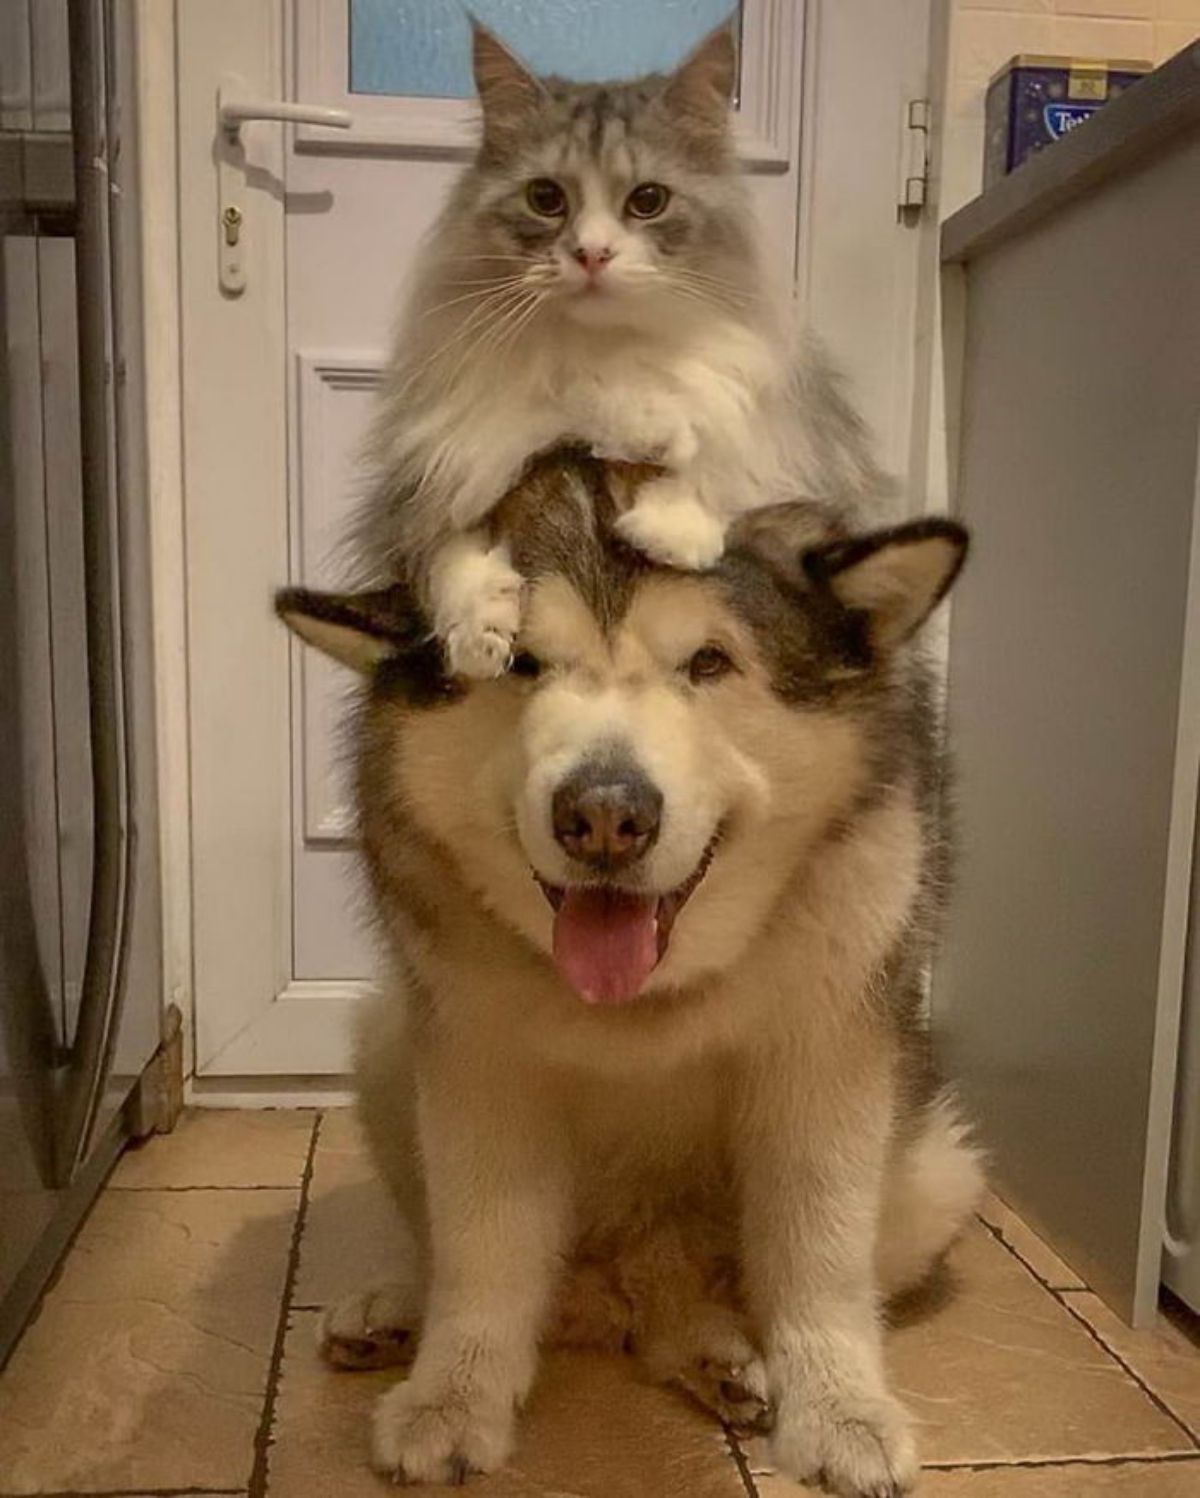 fluffy grey and white cat laying on a brown and white malamute sitting on the floor